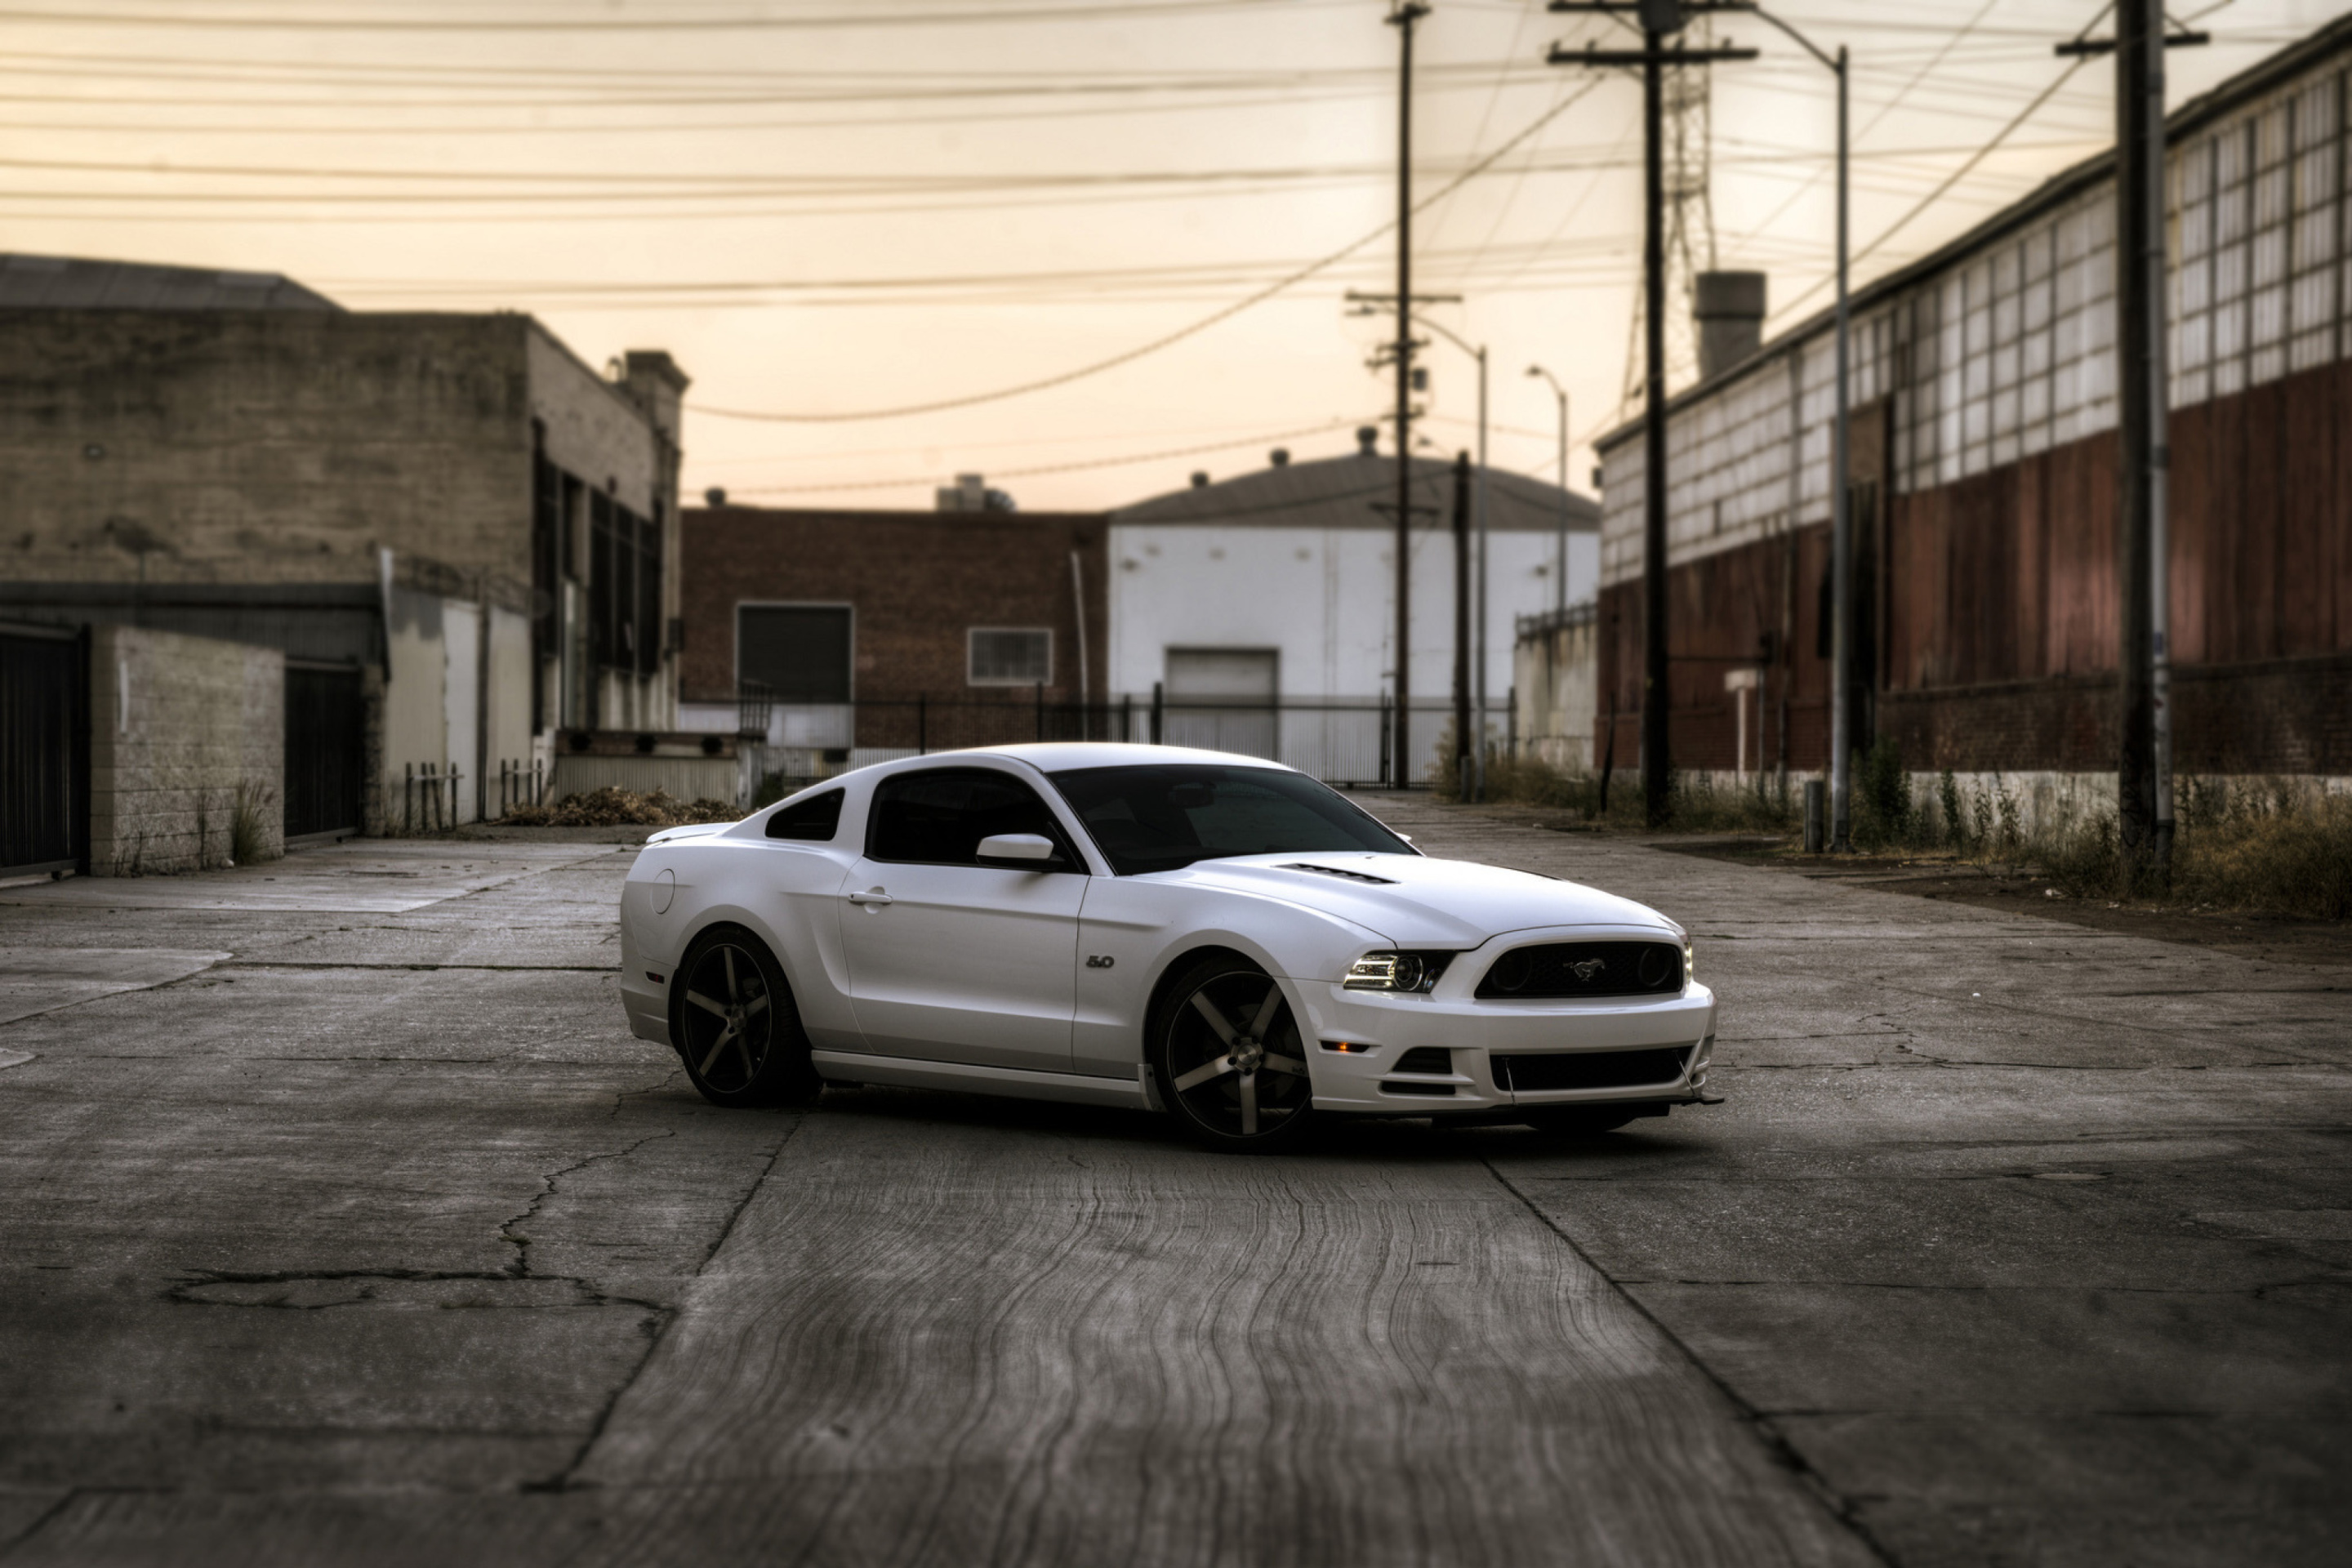 One of the girls streets white mustang